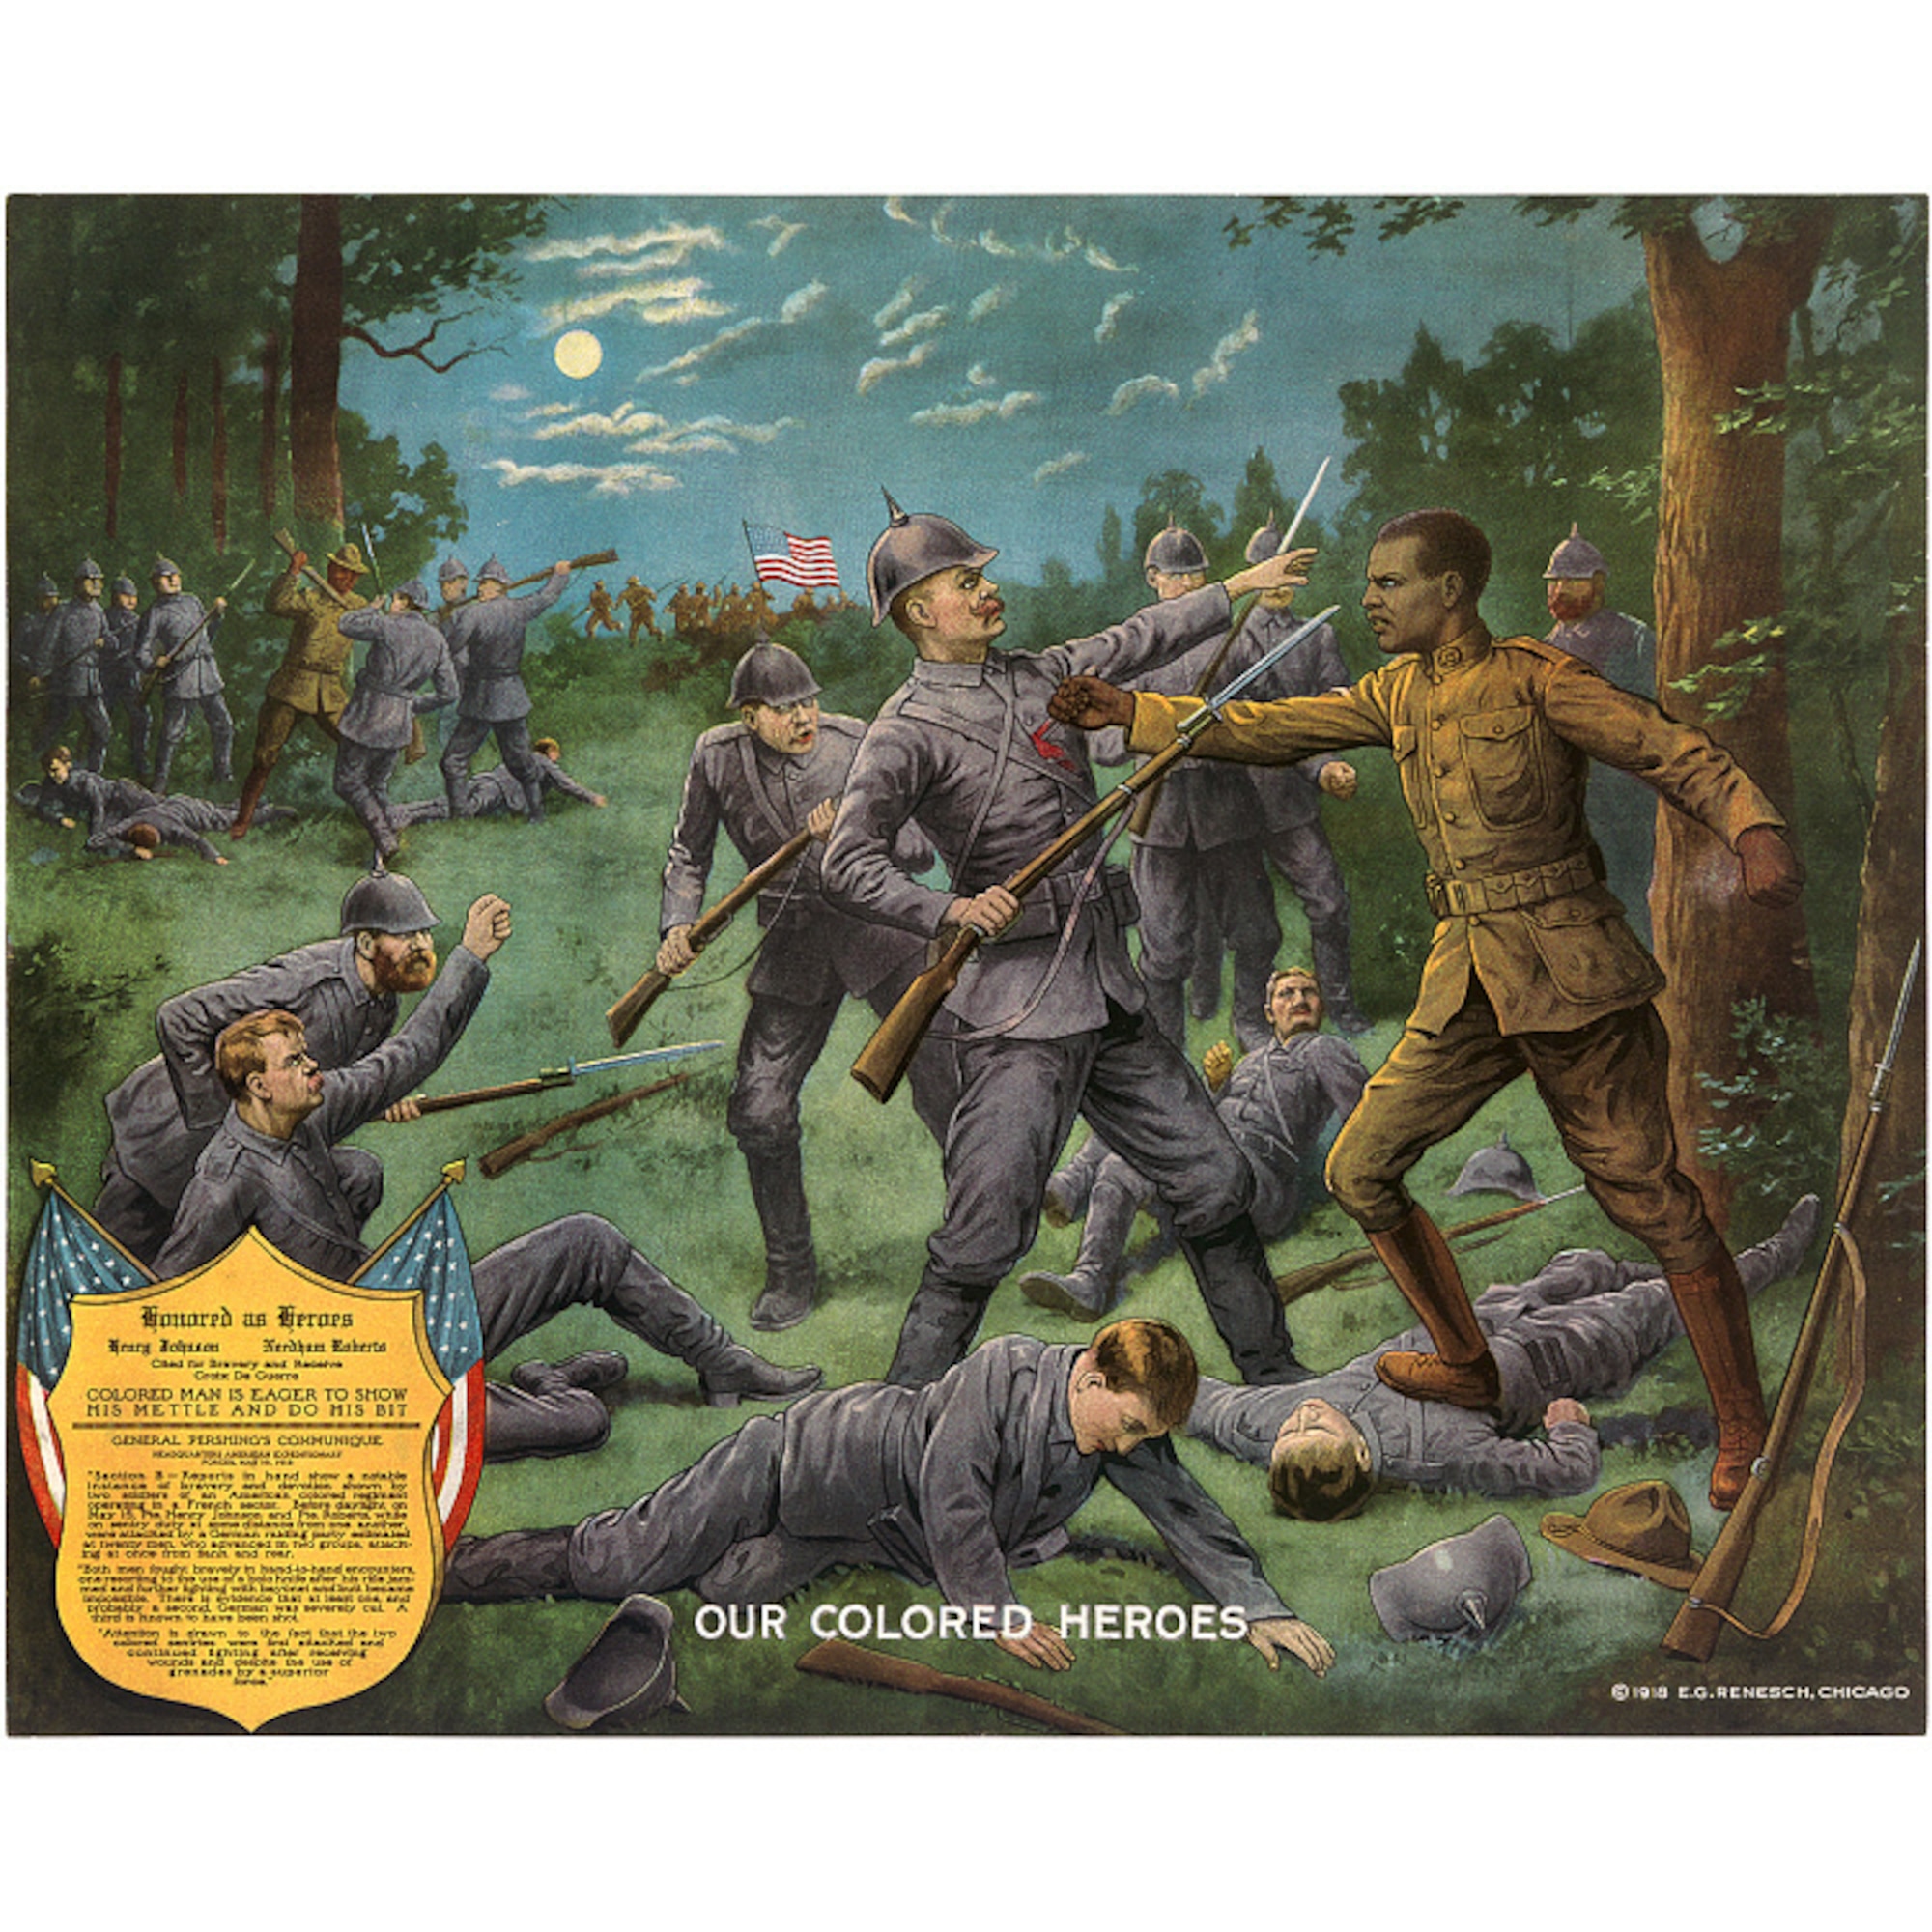 A painting of the heroic night of SGT. Johnson